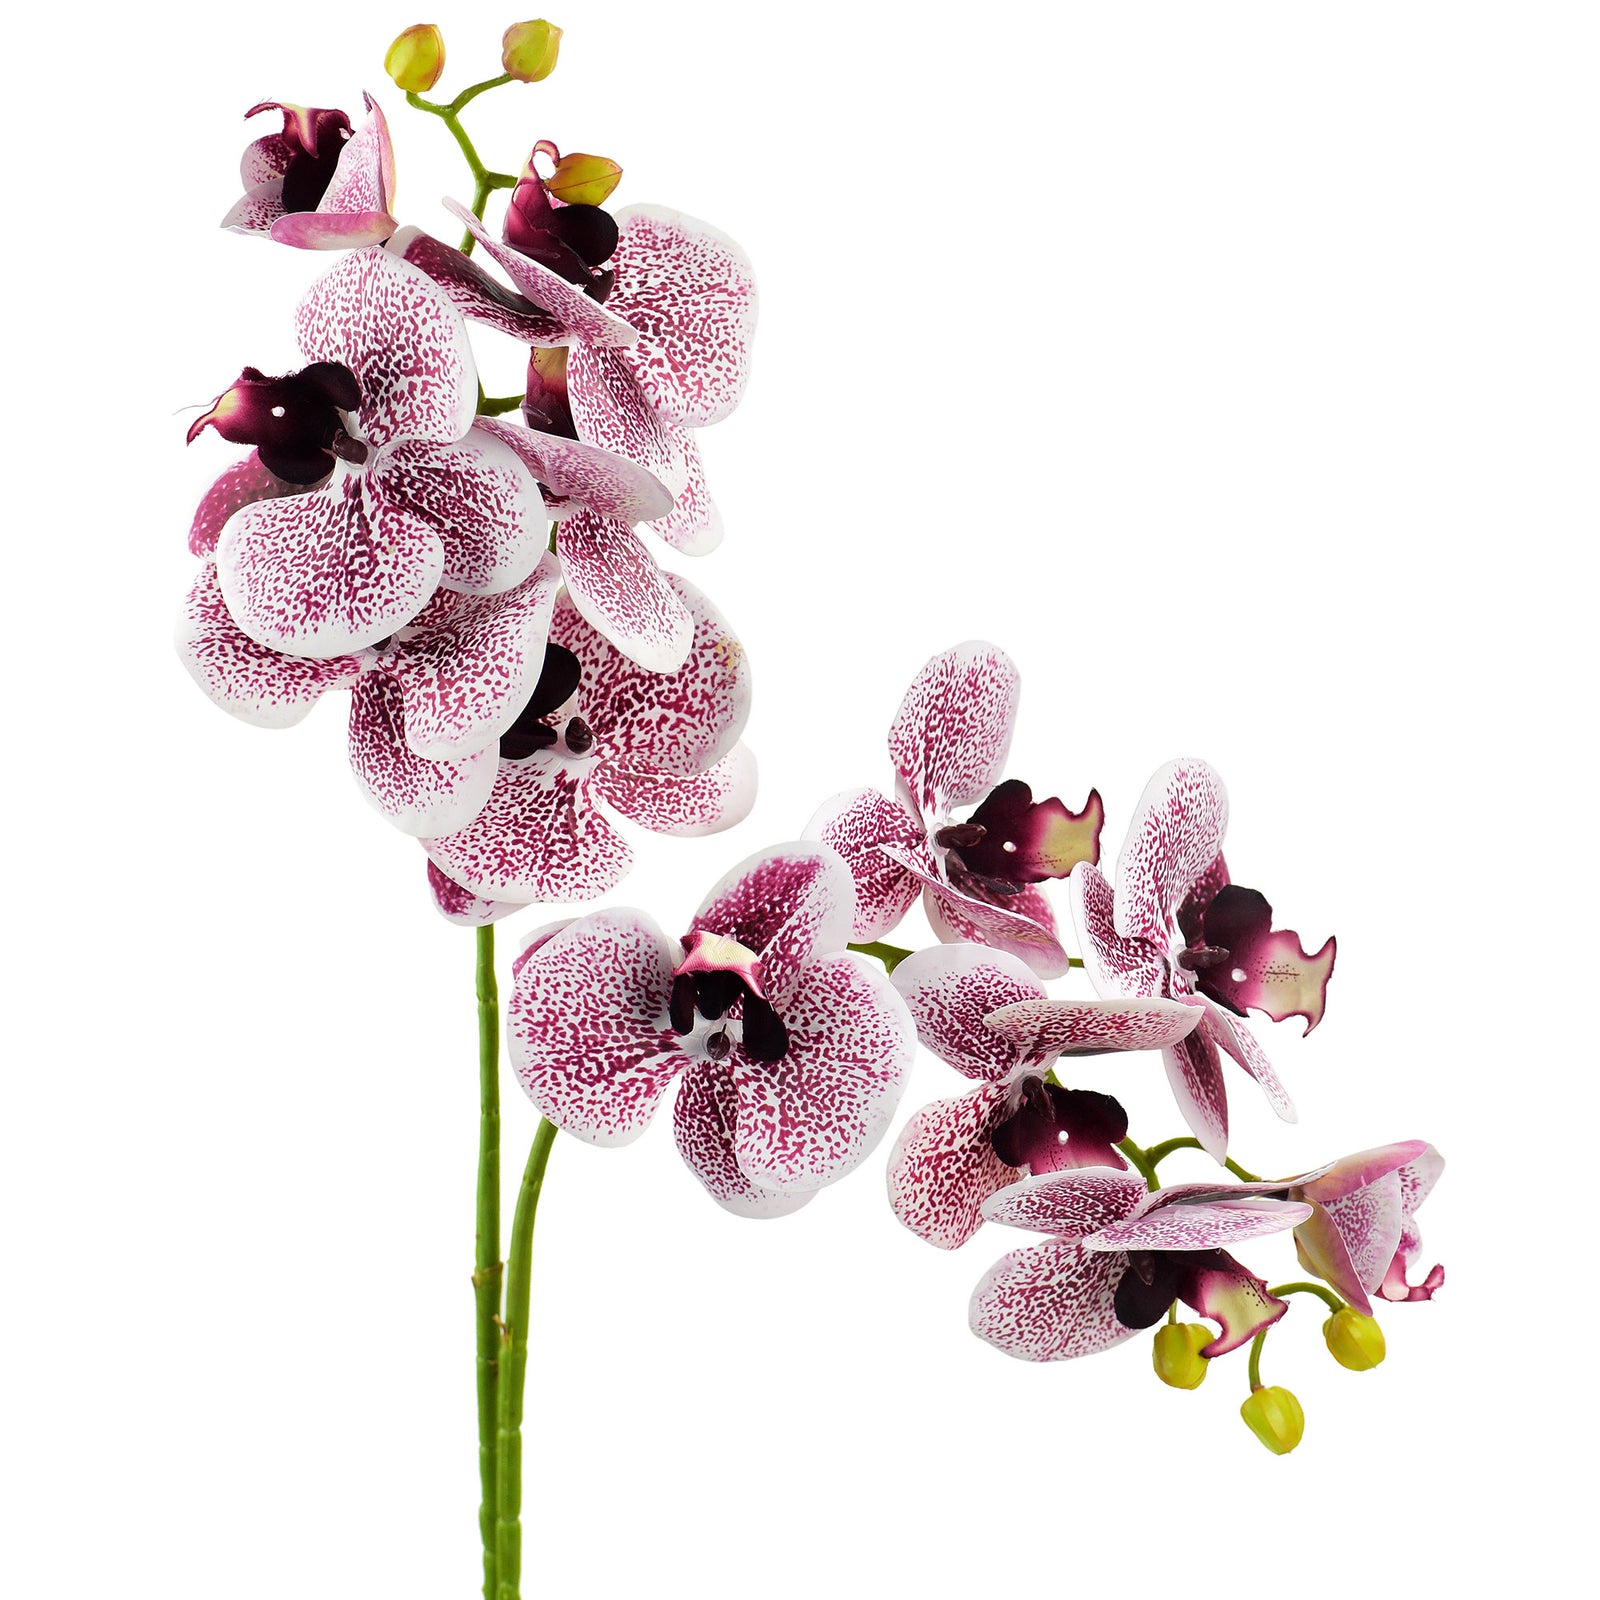 Light Magenta 2 Stems Real Touch Artificial Butterfly Orchids/Moth Orchid/Phalaenopsis Flowers 27.6" Tall 70cm